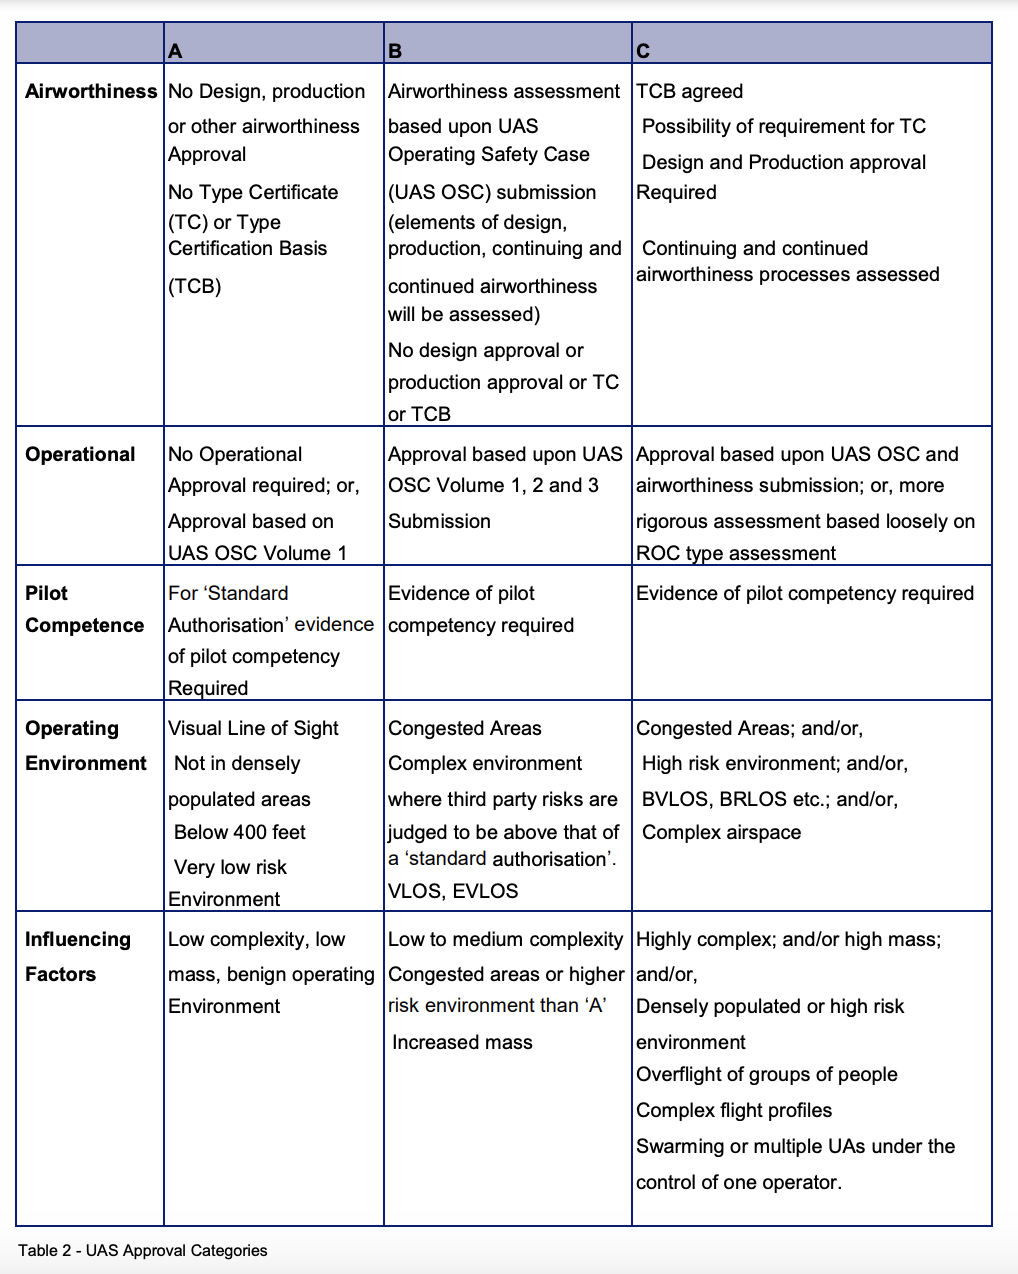 Table 2 - UAS Approval Categories